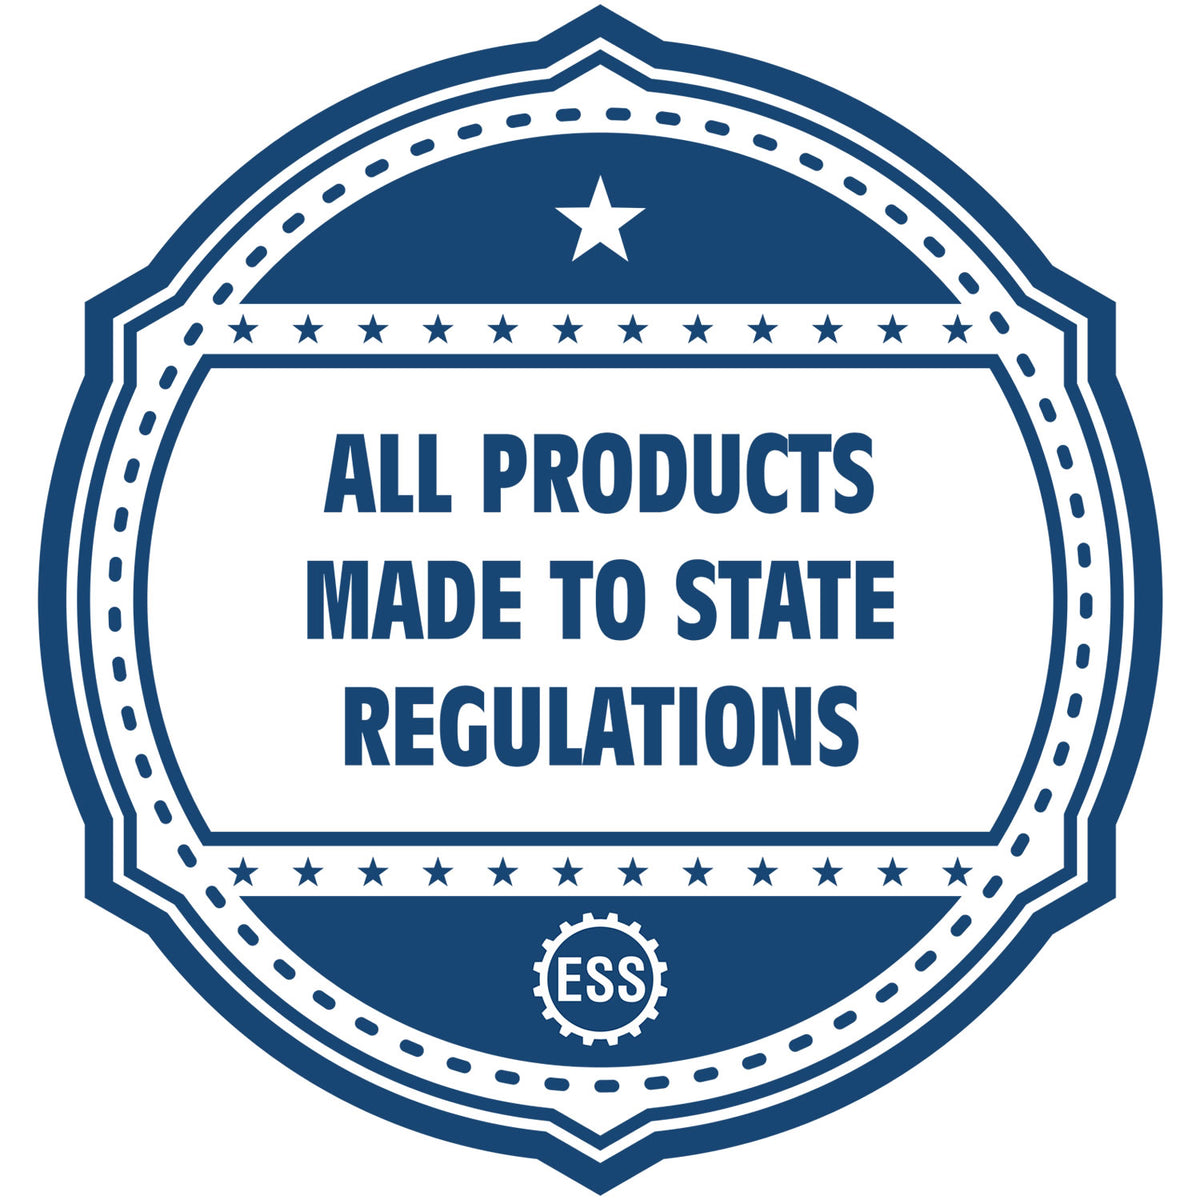 An icon or badge element for the Handheld Florida Land Surveyor Seal showing that this product is made in compliance with state regulations.